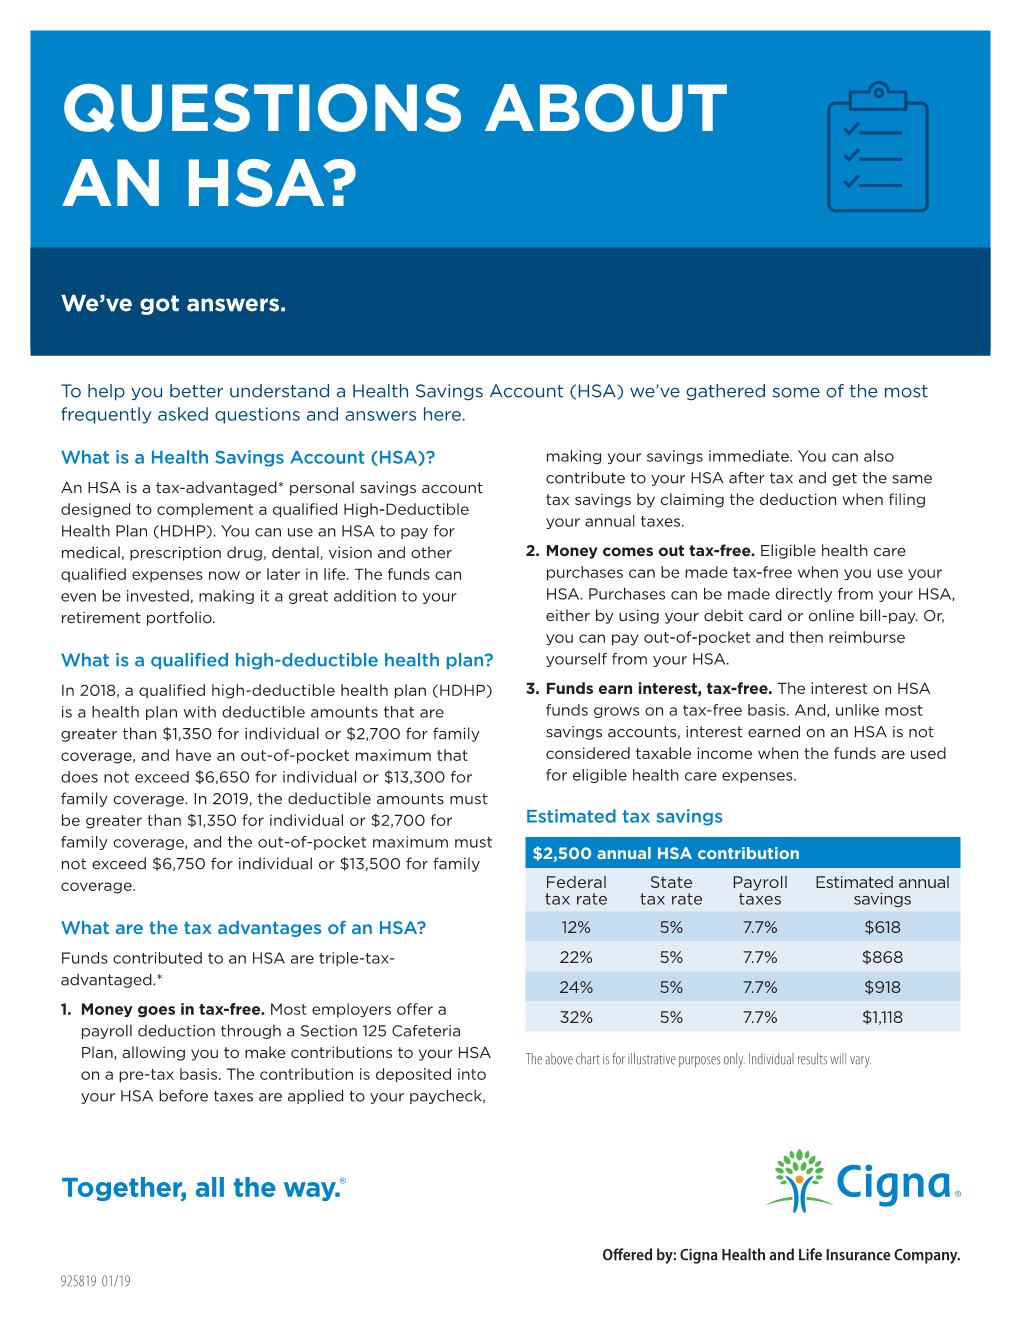 Questions About an Hsa?